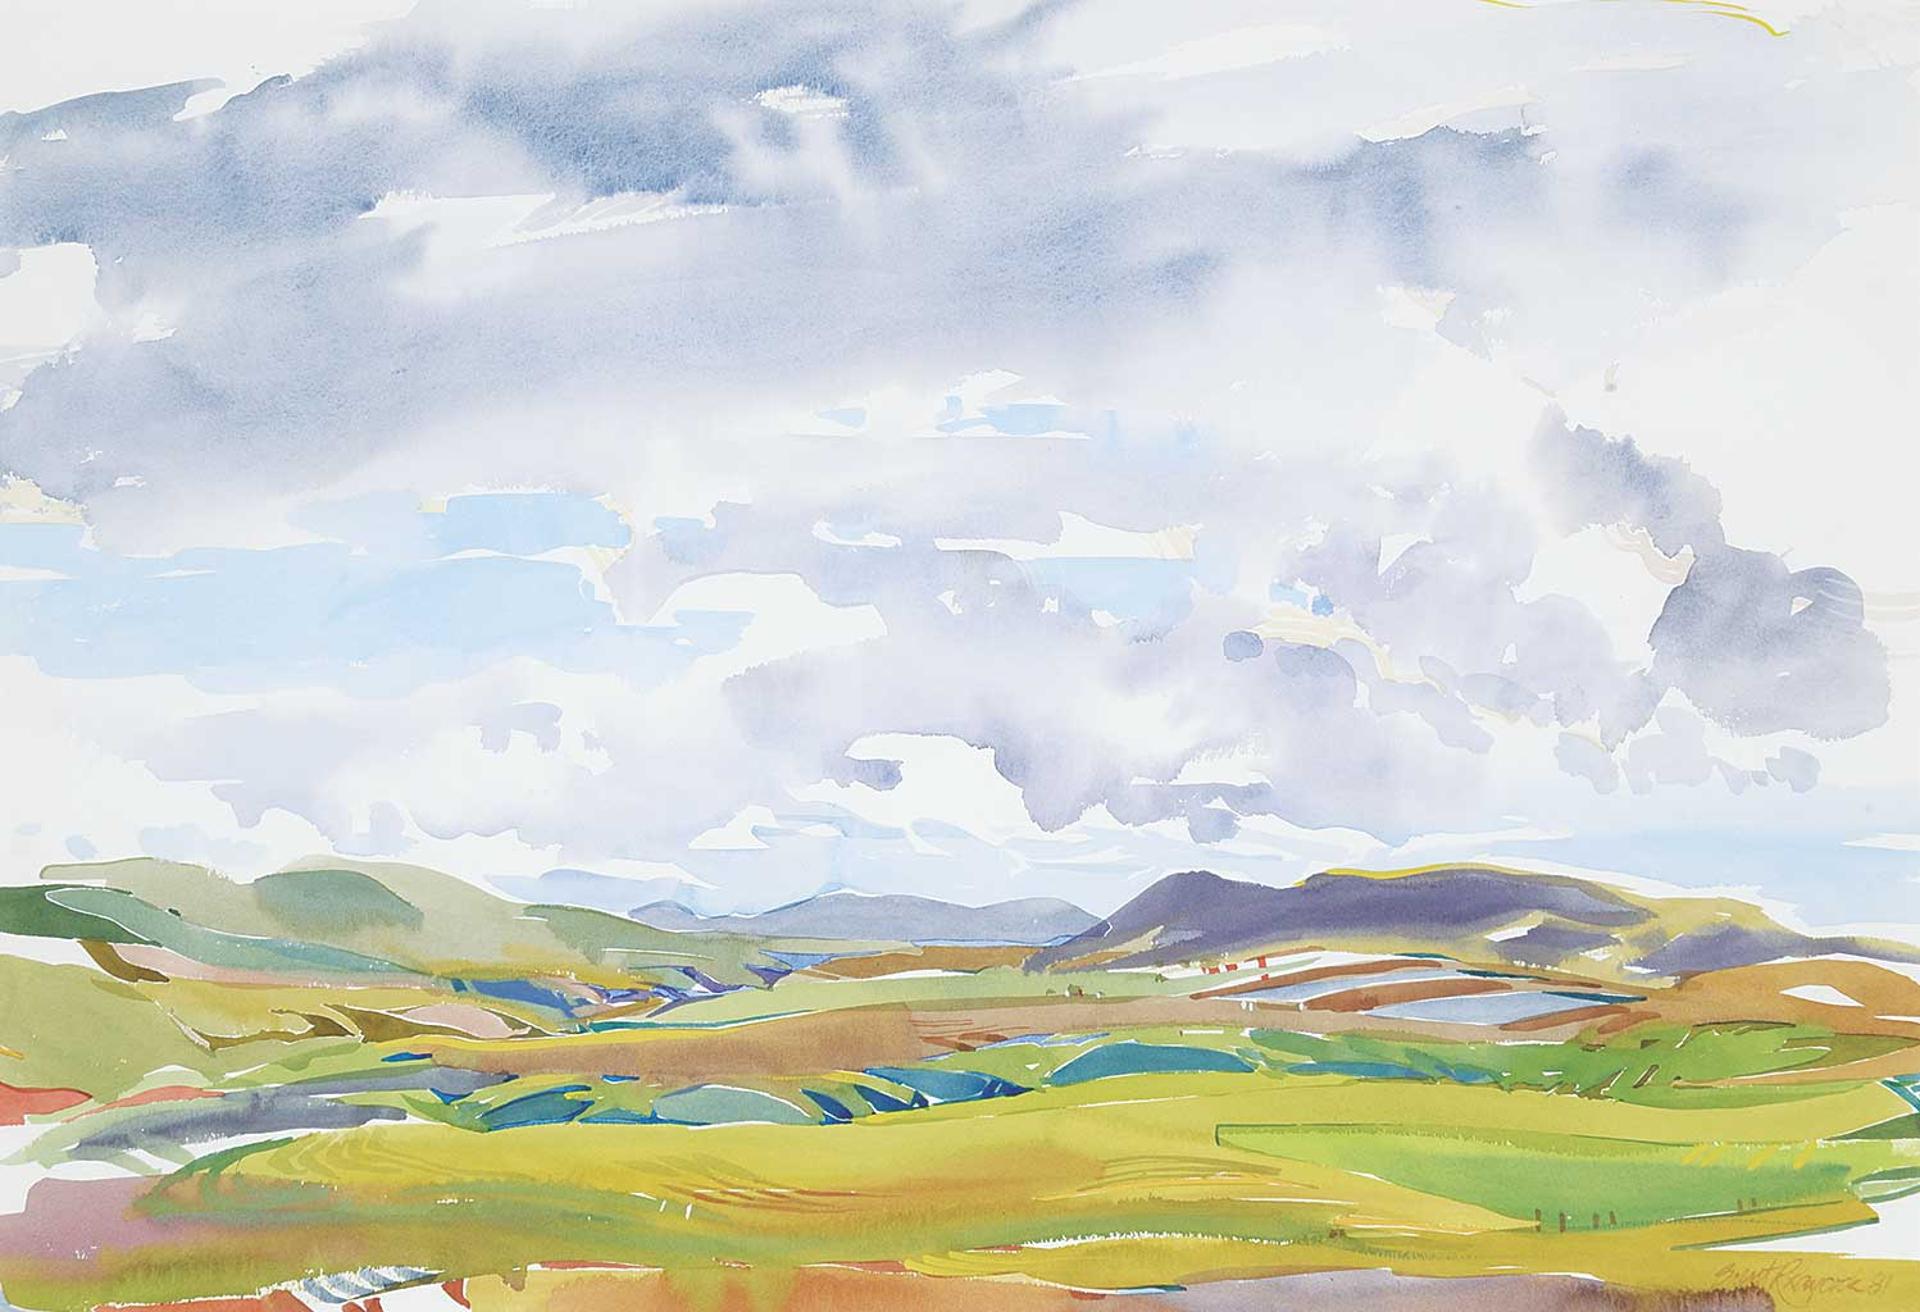 Brent R. Laycock (1947) - Untitled - Foothills Spring